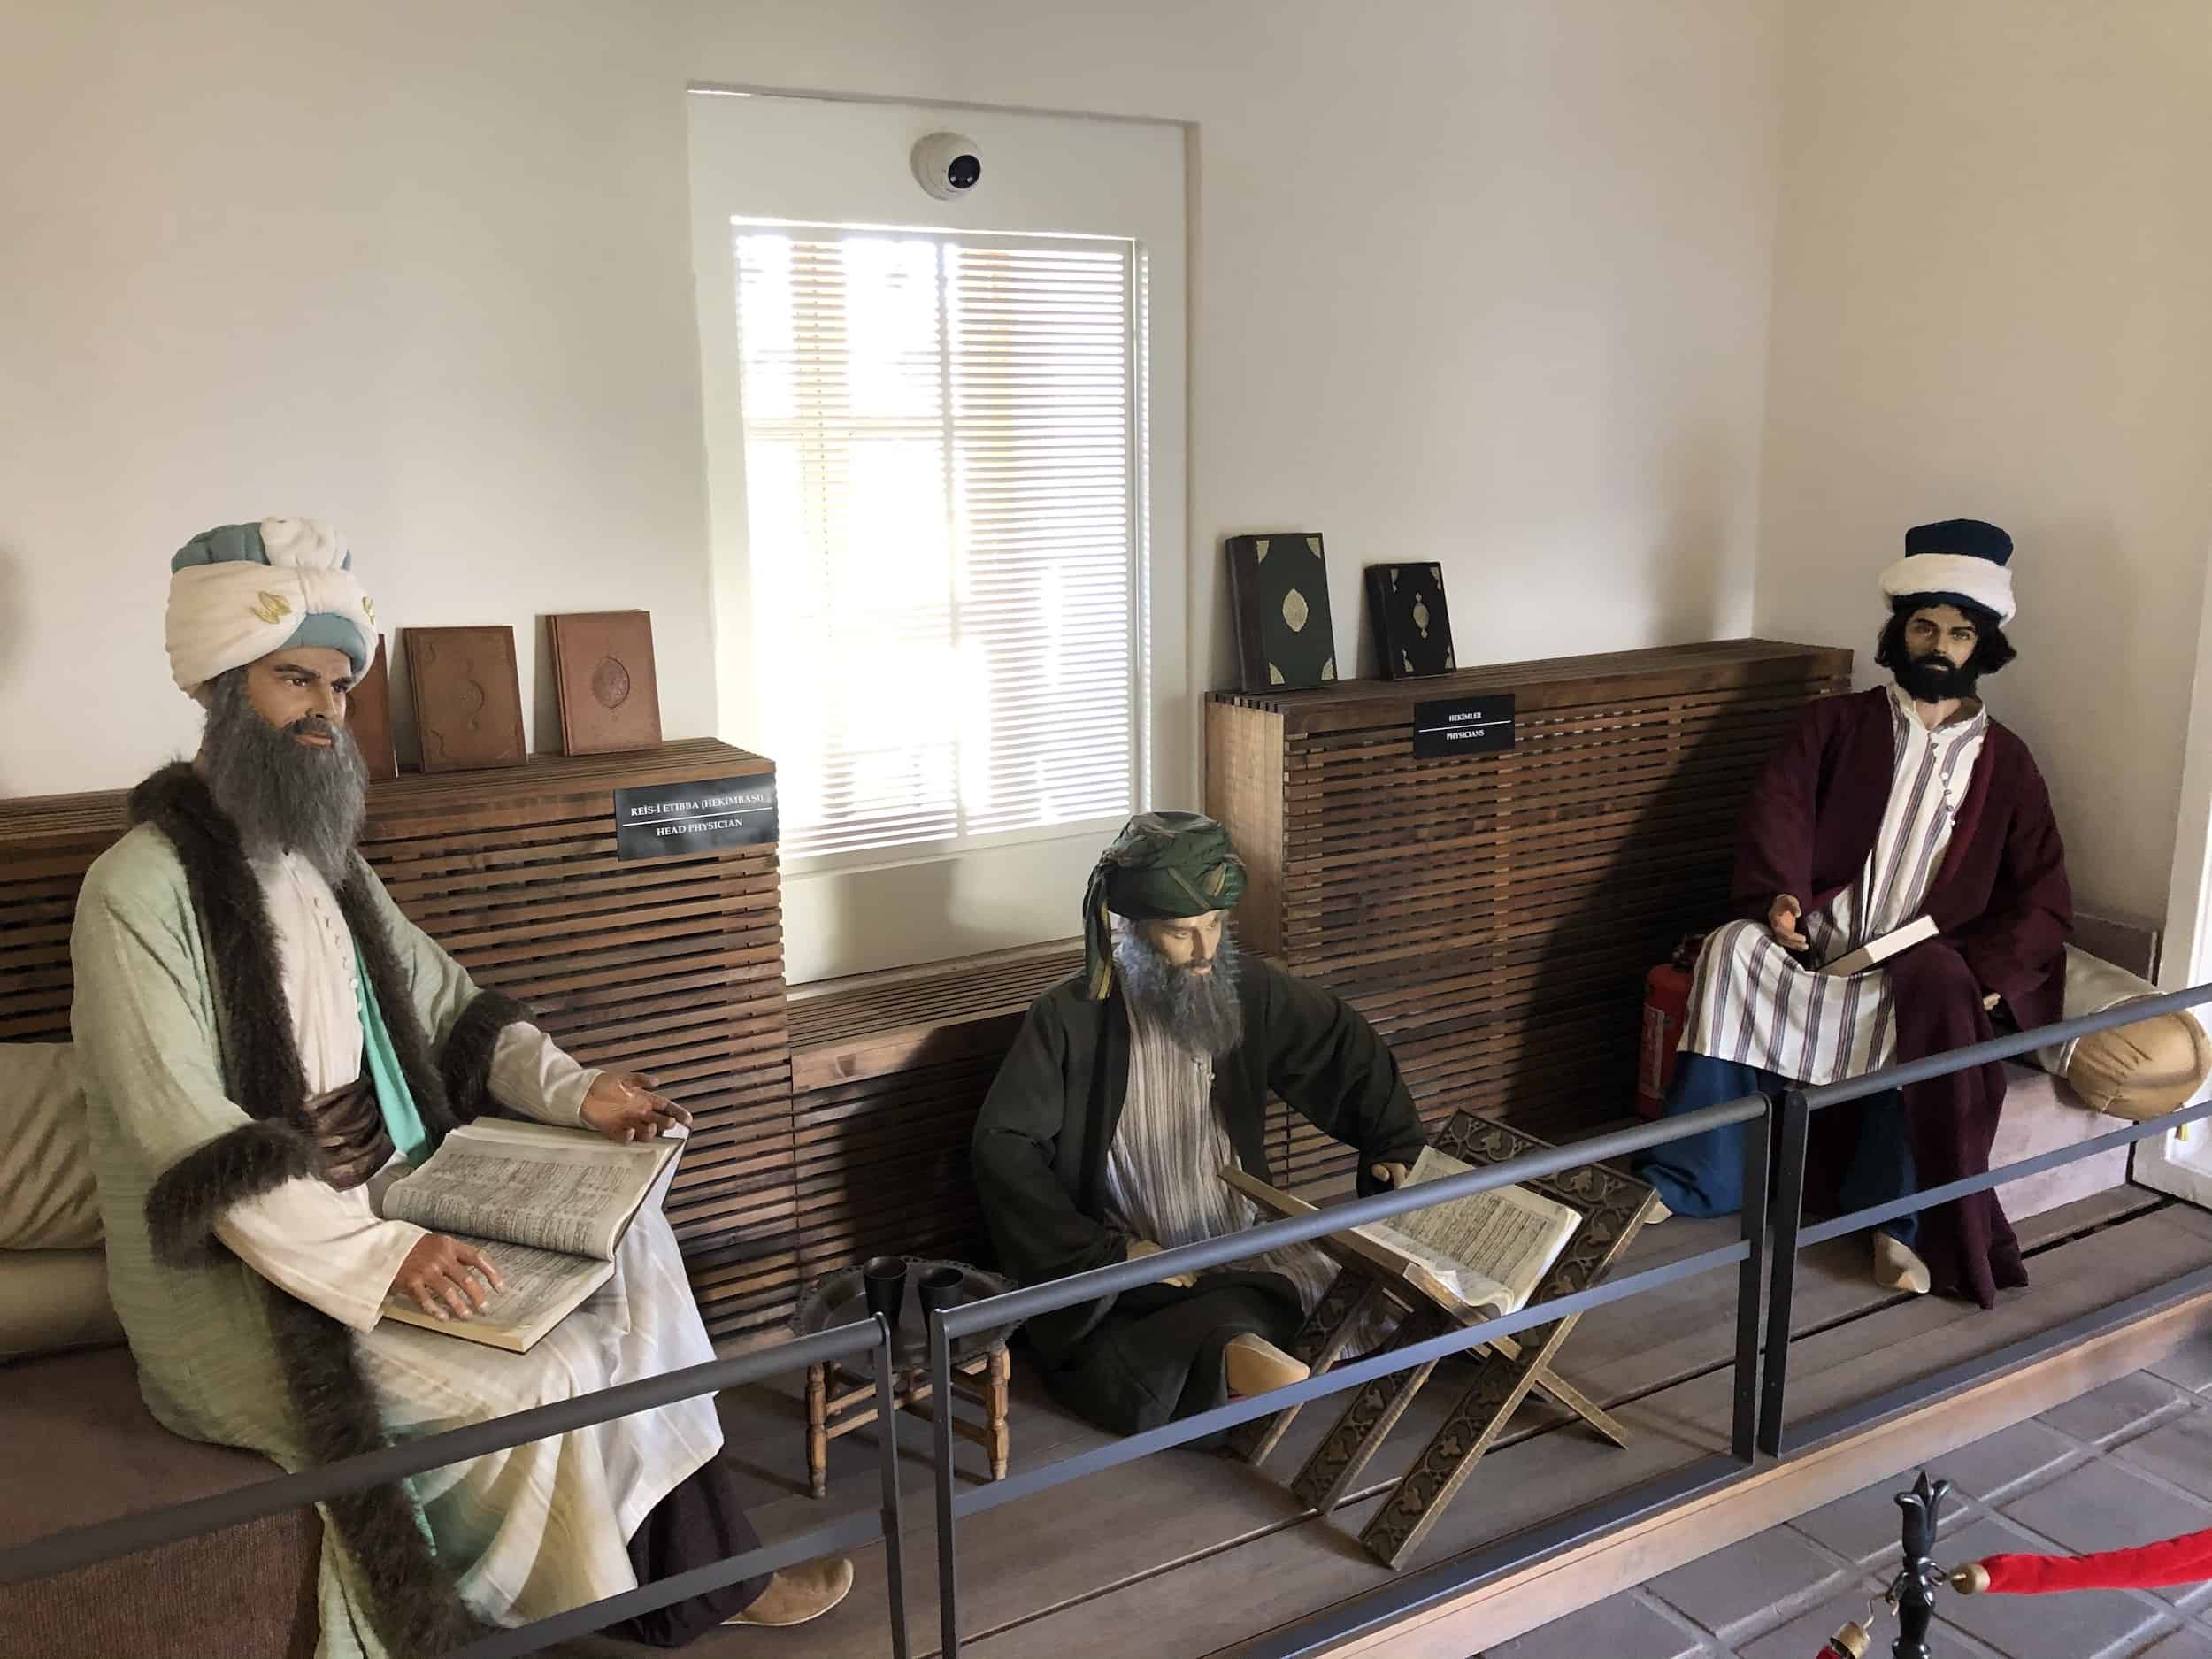 Medical staff at the Complex of Bayezid II Health Museum in Edirne, Turkey